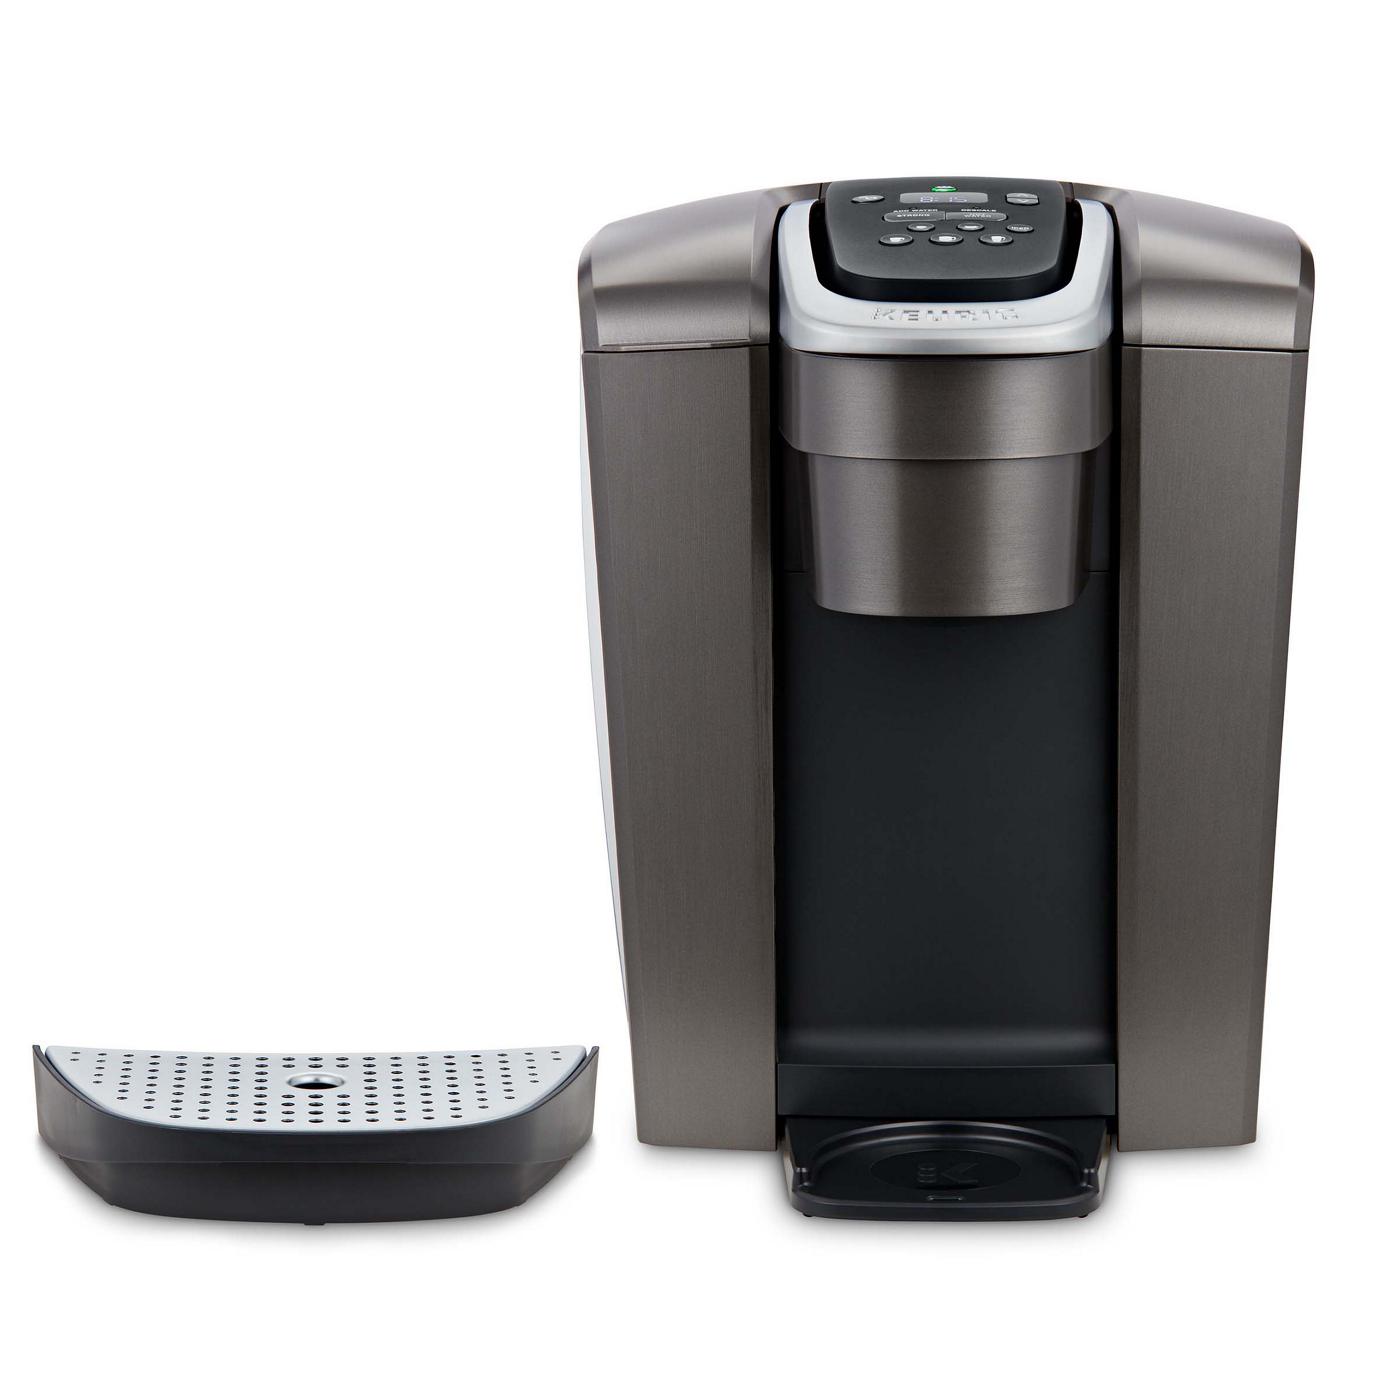 The Keurig K-Elite Coffee Maker Is $60 Cheaper Today - The Manual